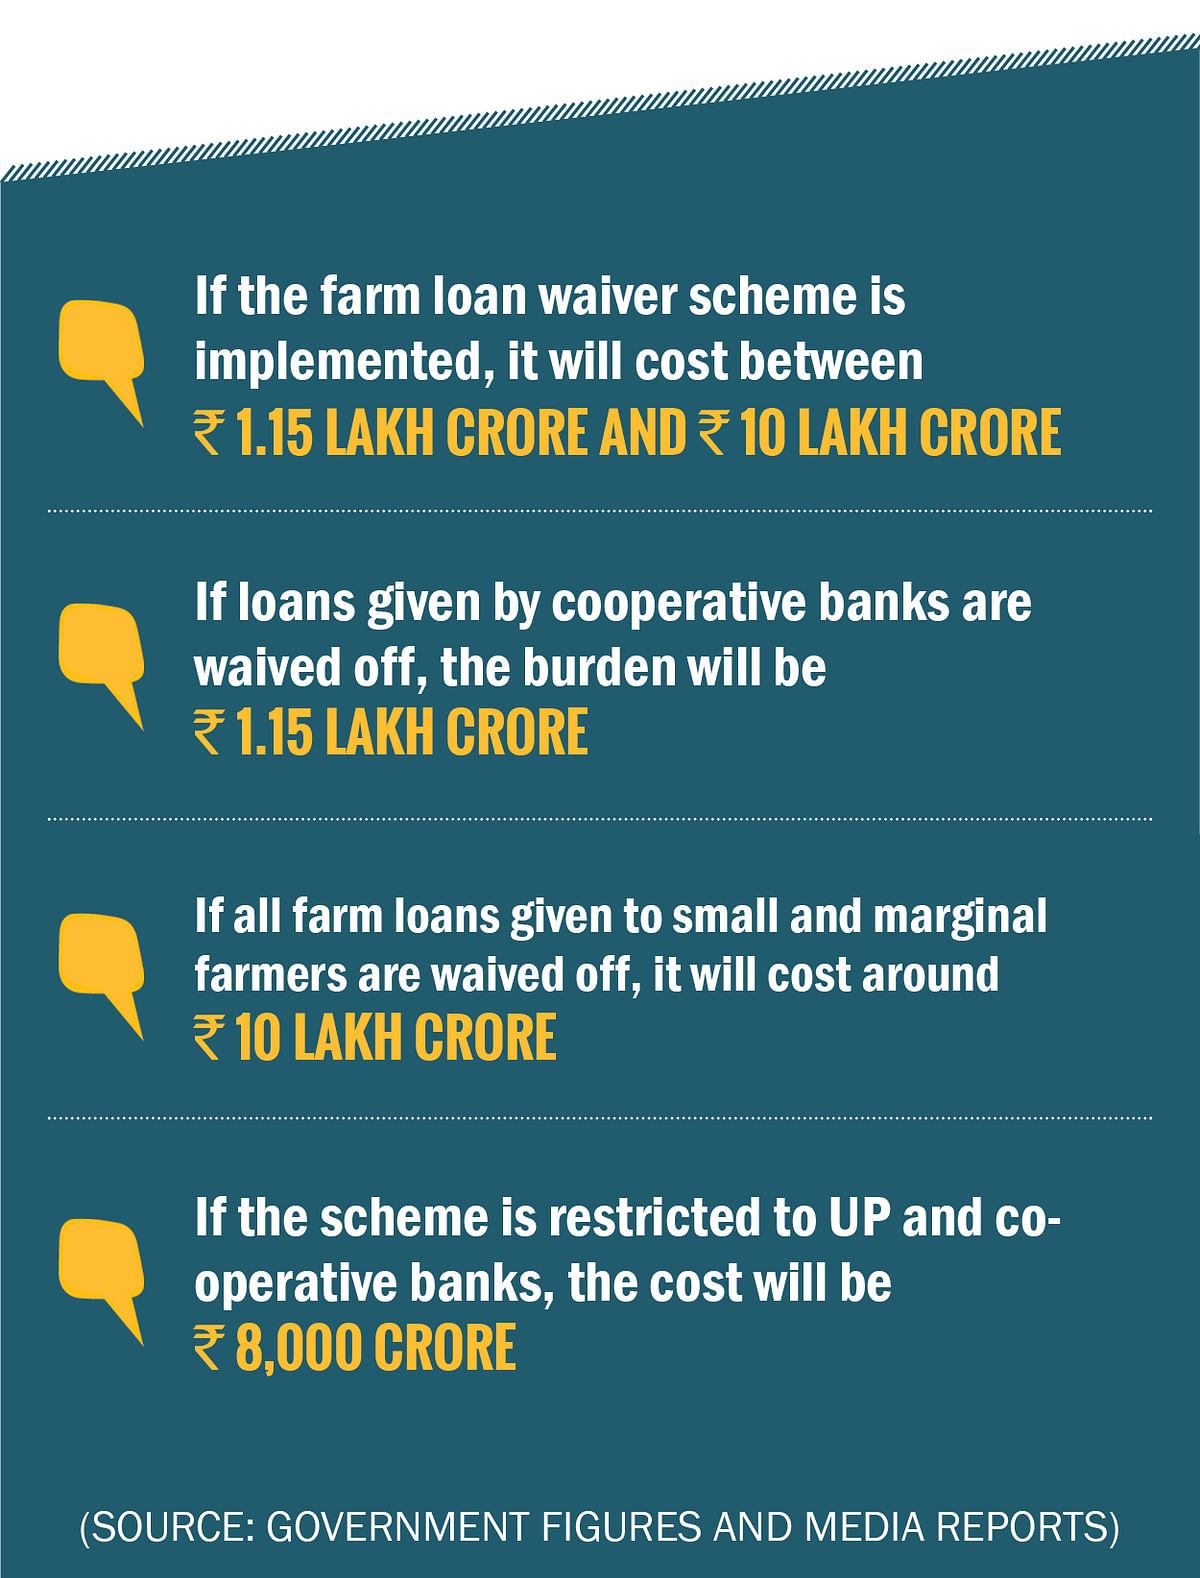 Is the country’s banking system prepared for yet another shock, saddled as they already are with swelling bad loans?